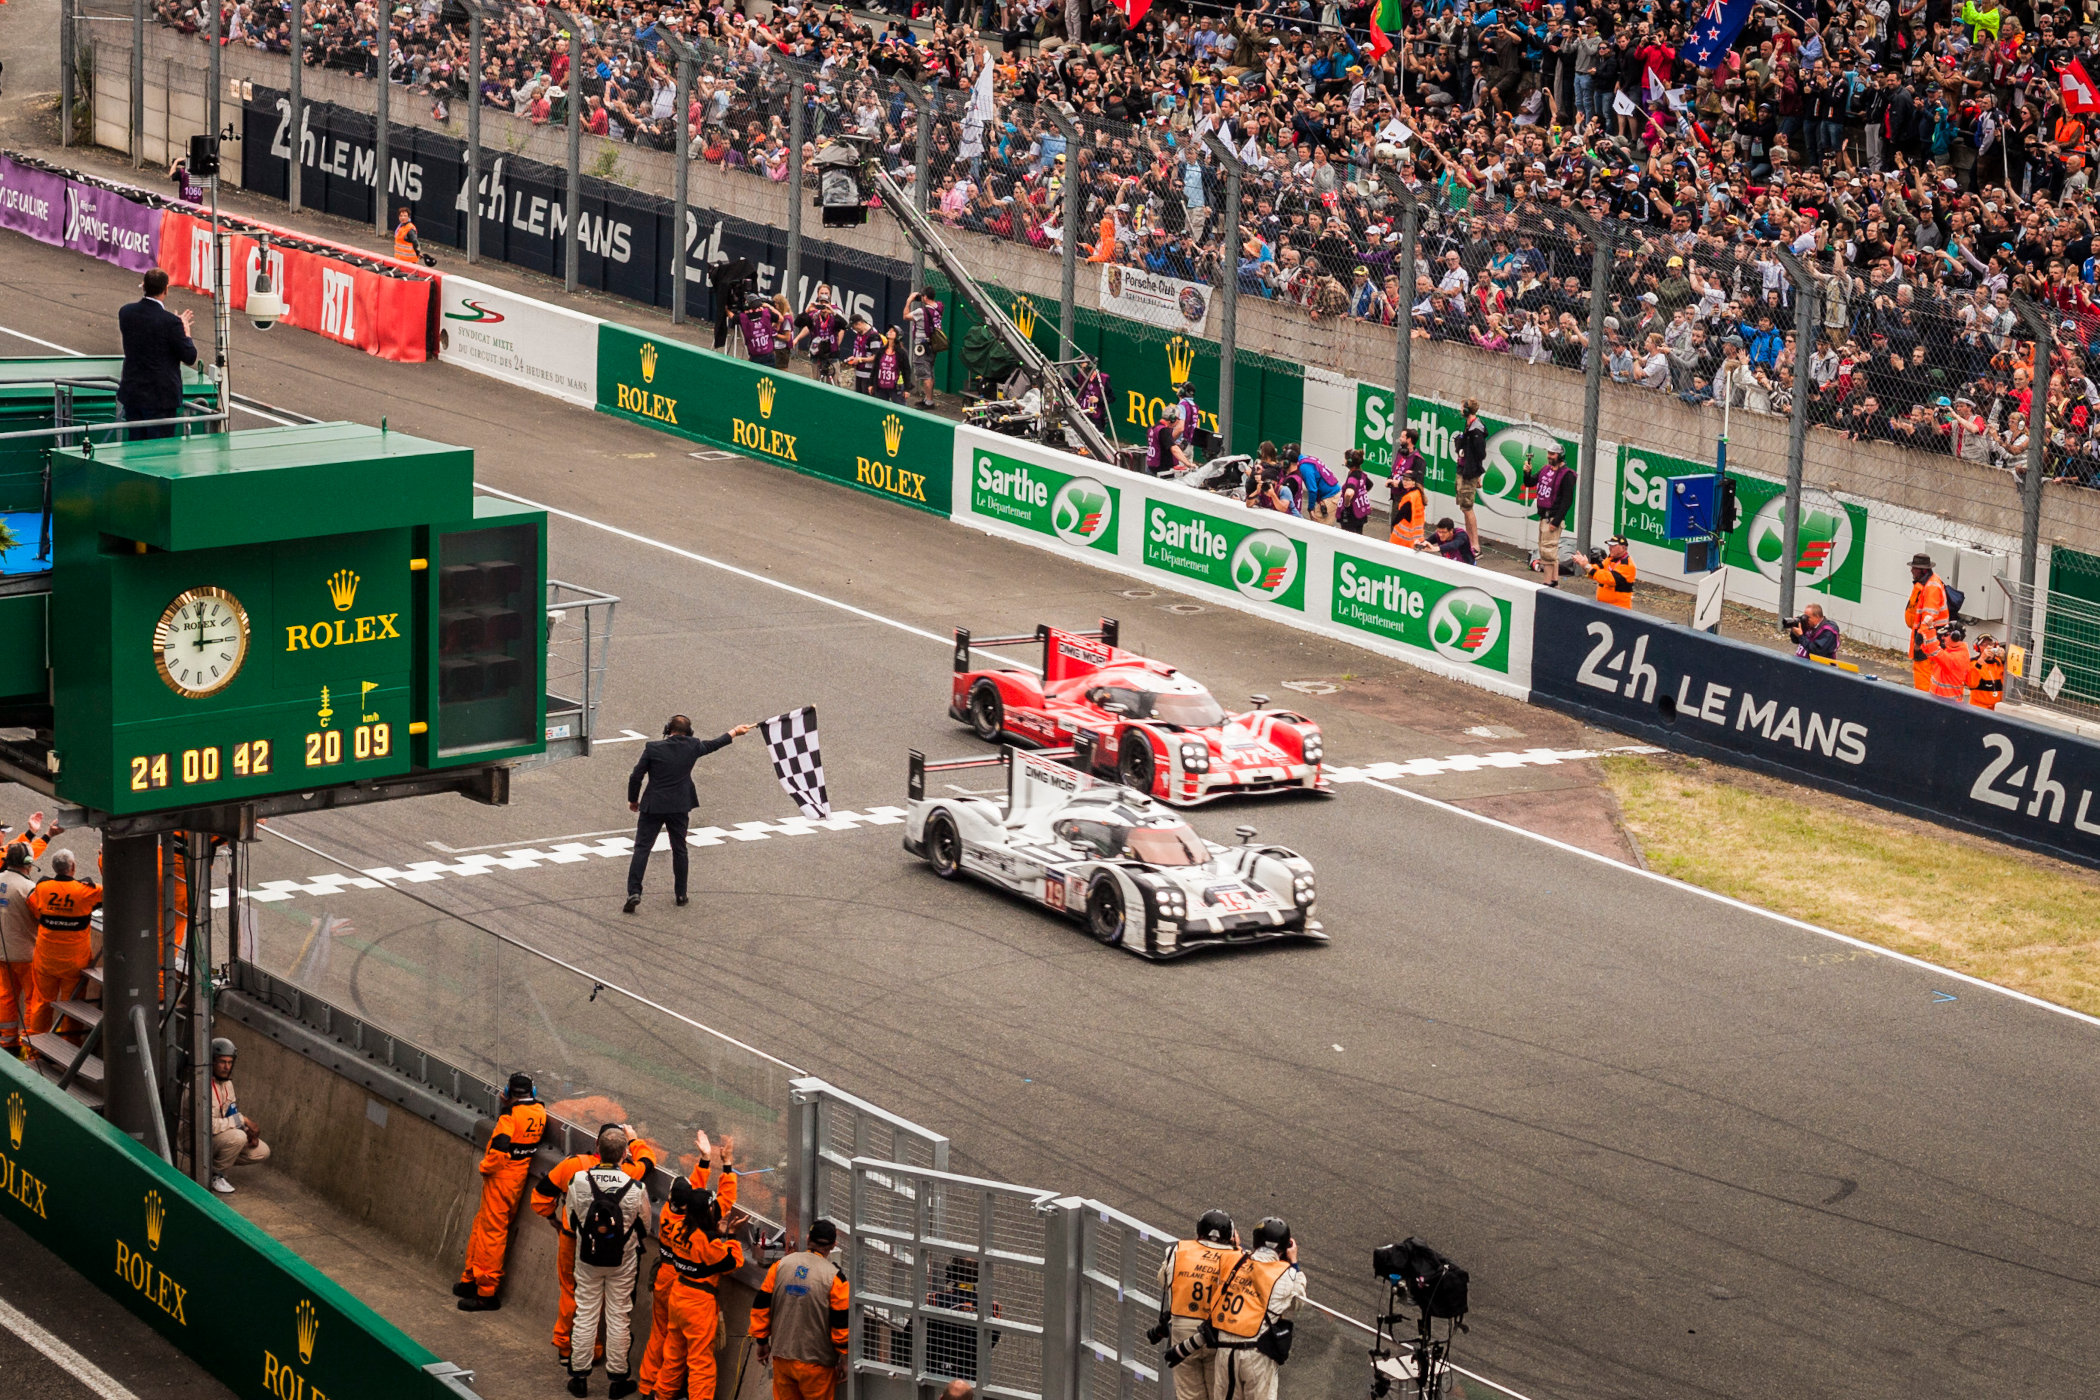 24 Hours of Le Mans - 2015 Edition - Two Porsche 919 Hybrids crossing the line to claim the manufacturer's 17th overall victory